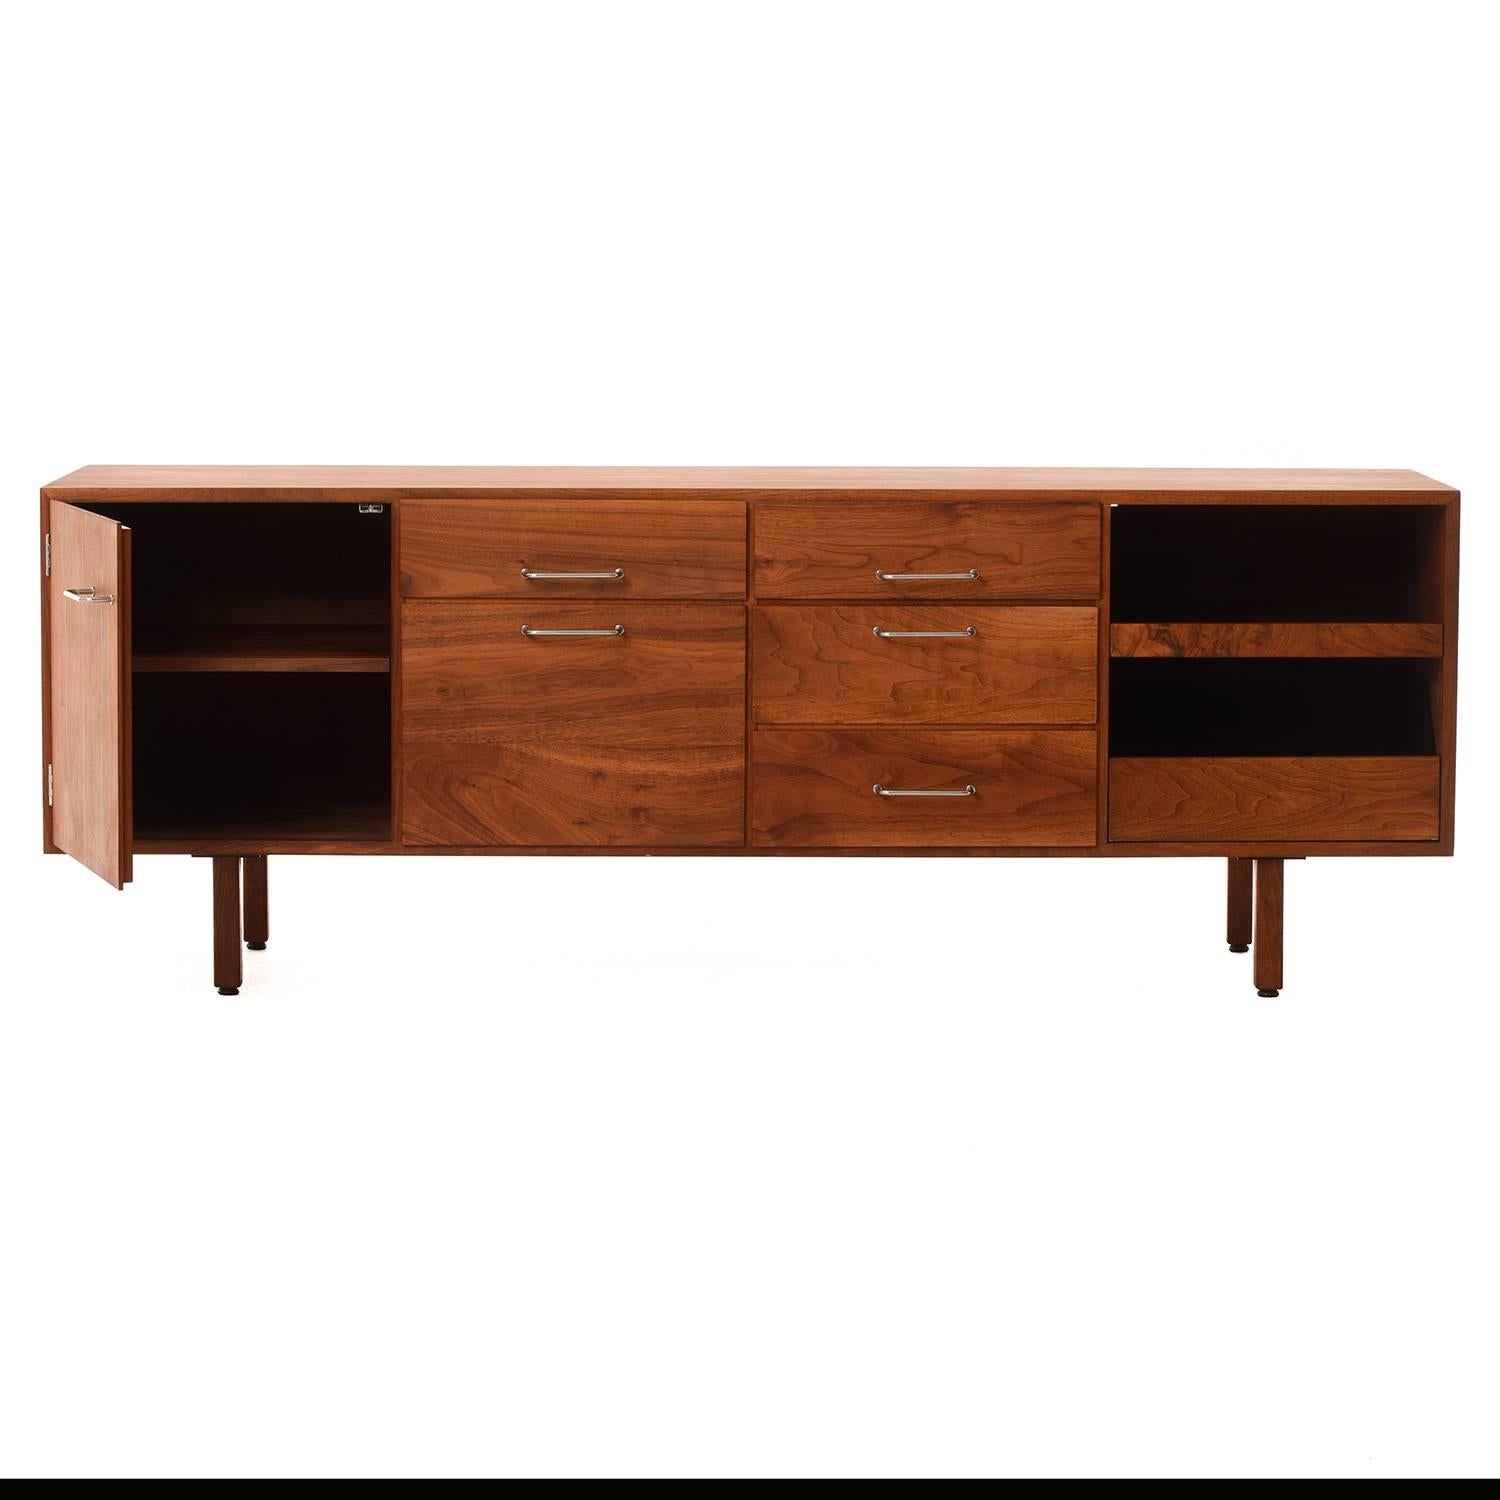 Lovely oiled walnut office credenza by Jens Risom. Shelf in left interior cupboard is adjustable. Right side (facing) boasts a roller tray and paper trough. Ventilated through back side.

Professional, skilled furniture restoration is an integral